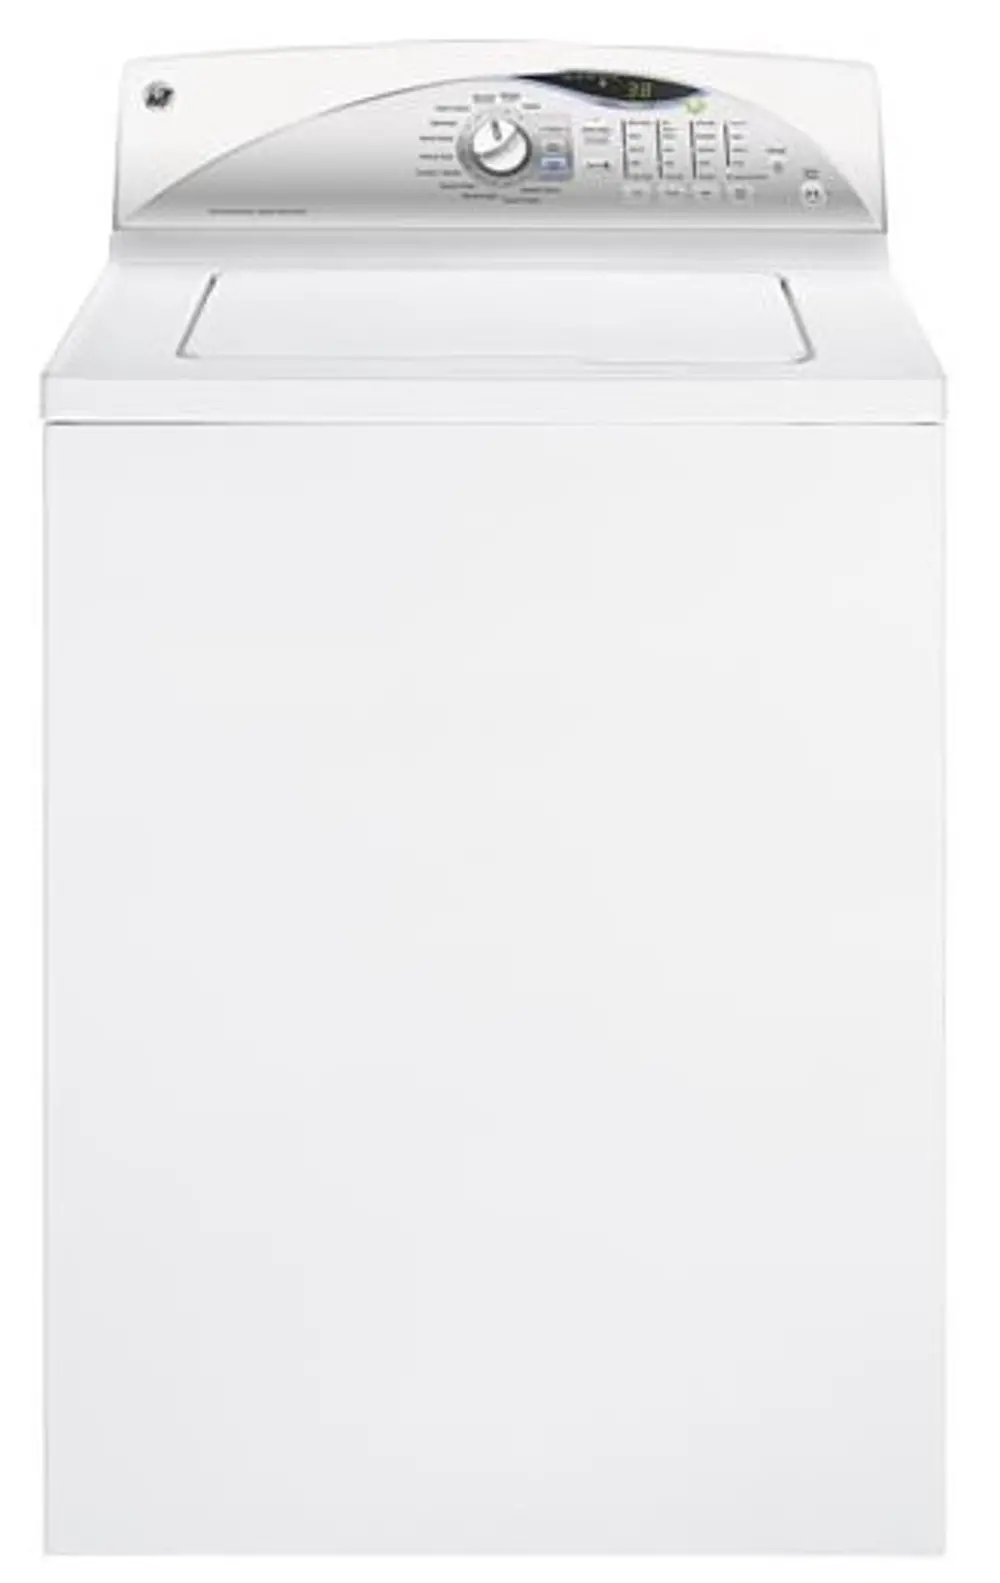 GTWN5650FWS GE Top Load Washer-1